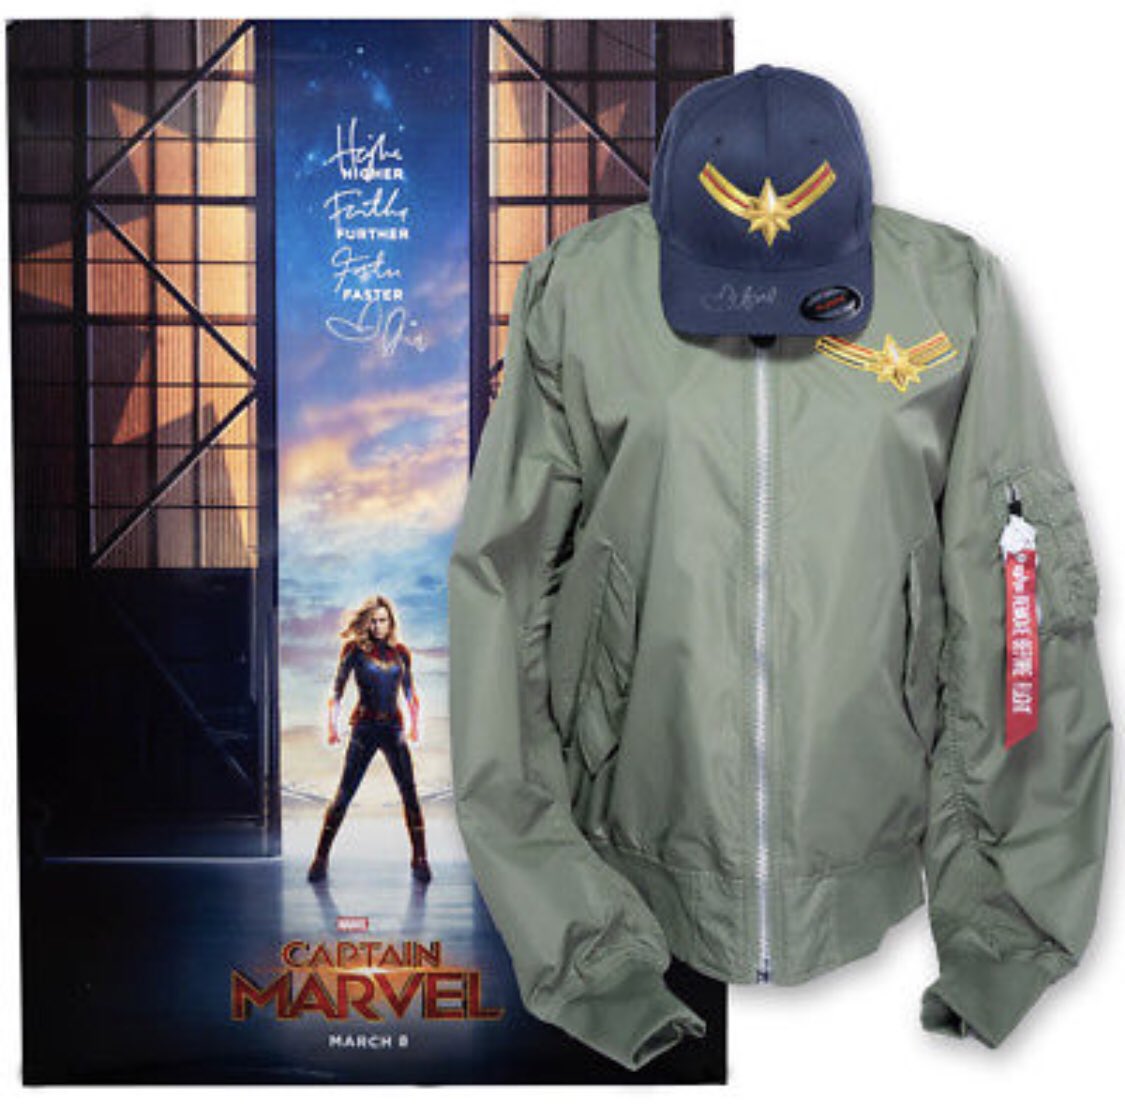 REMINDER TO ALL #MARVEL FANS: only 5 days left to bid on a one of a kind #CaptainMarvel package on @ebay. 100% of proceeds benefit @TIMESUPLDF! Head to ebay.com/timesup to check out everything included in the package and bid today. #ebayforcharity